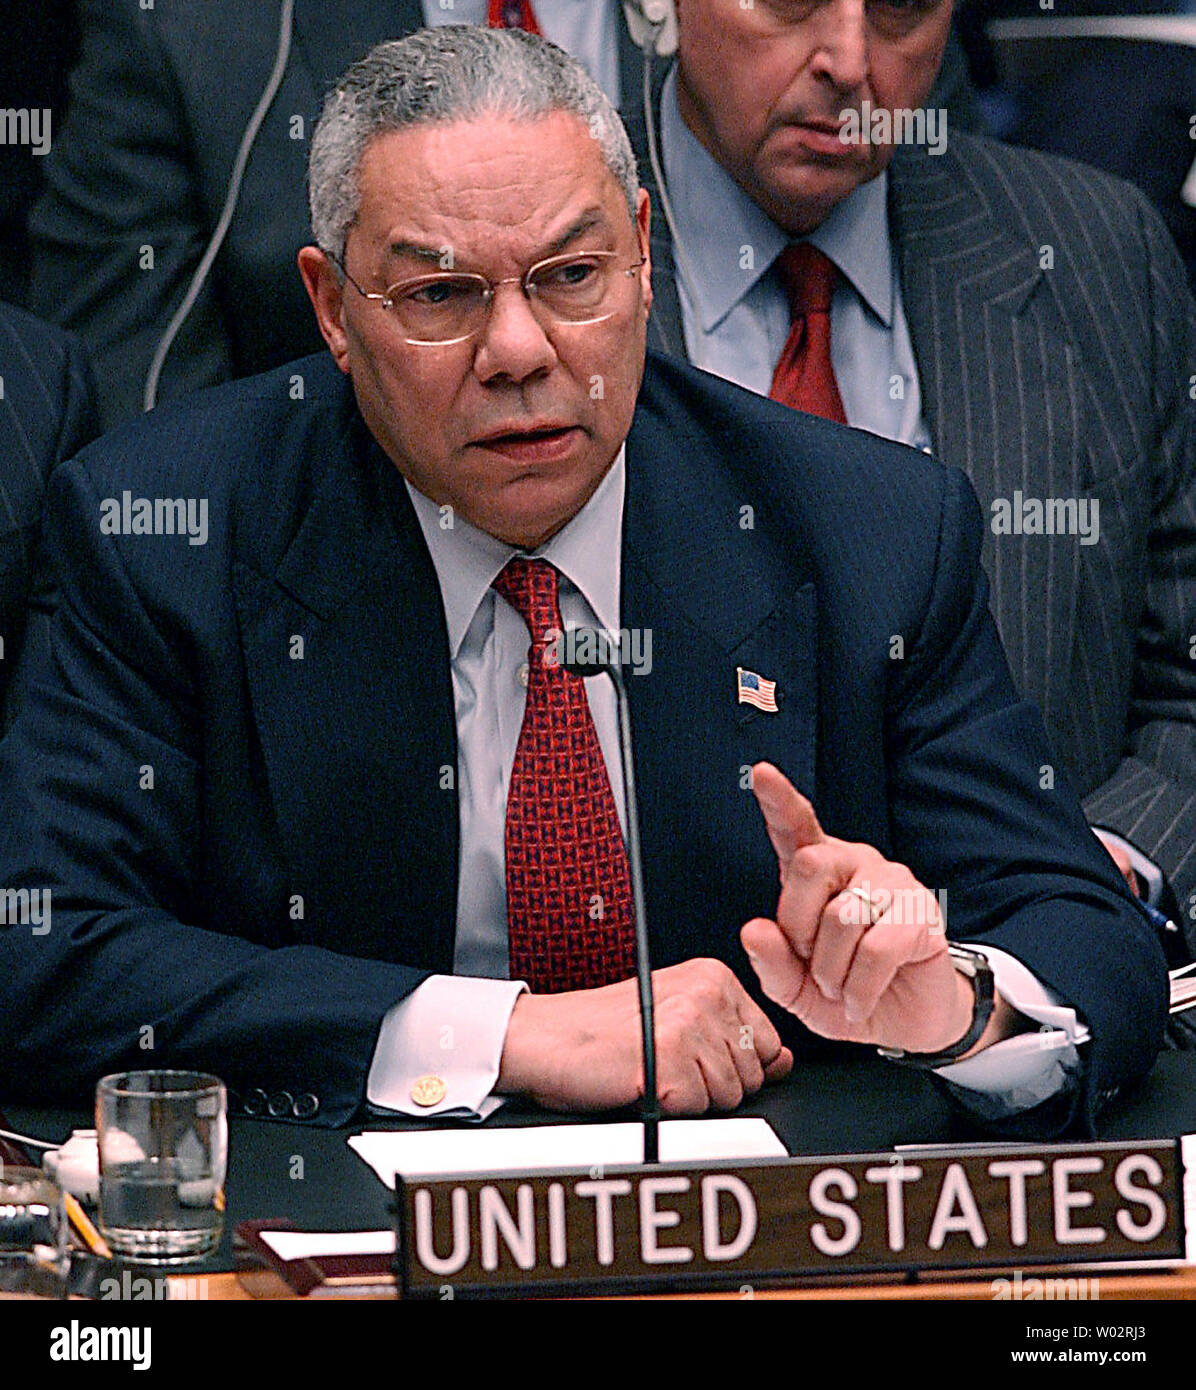 United States Secretary of State Colin Powell outlines the United States policies towards Iraq  at the Jan. 20, 2003 ministerial meetings on terrorism held at the United Nations Security Council.     (UPI Photo/Ezio Petersen) Stock Photo